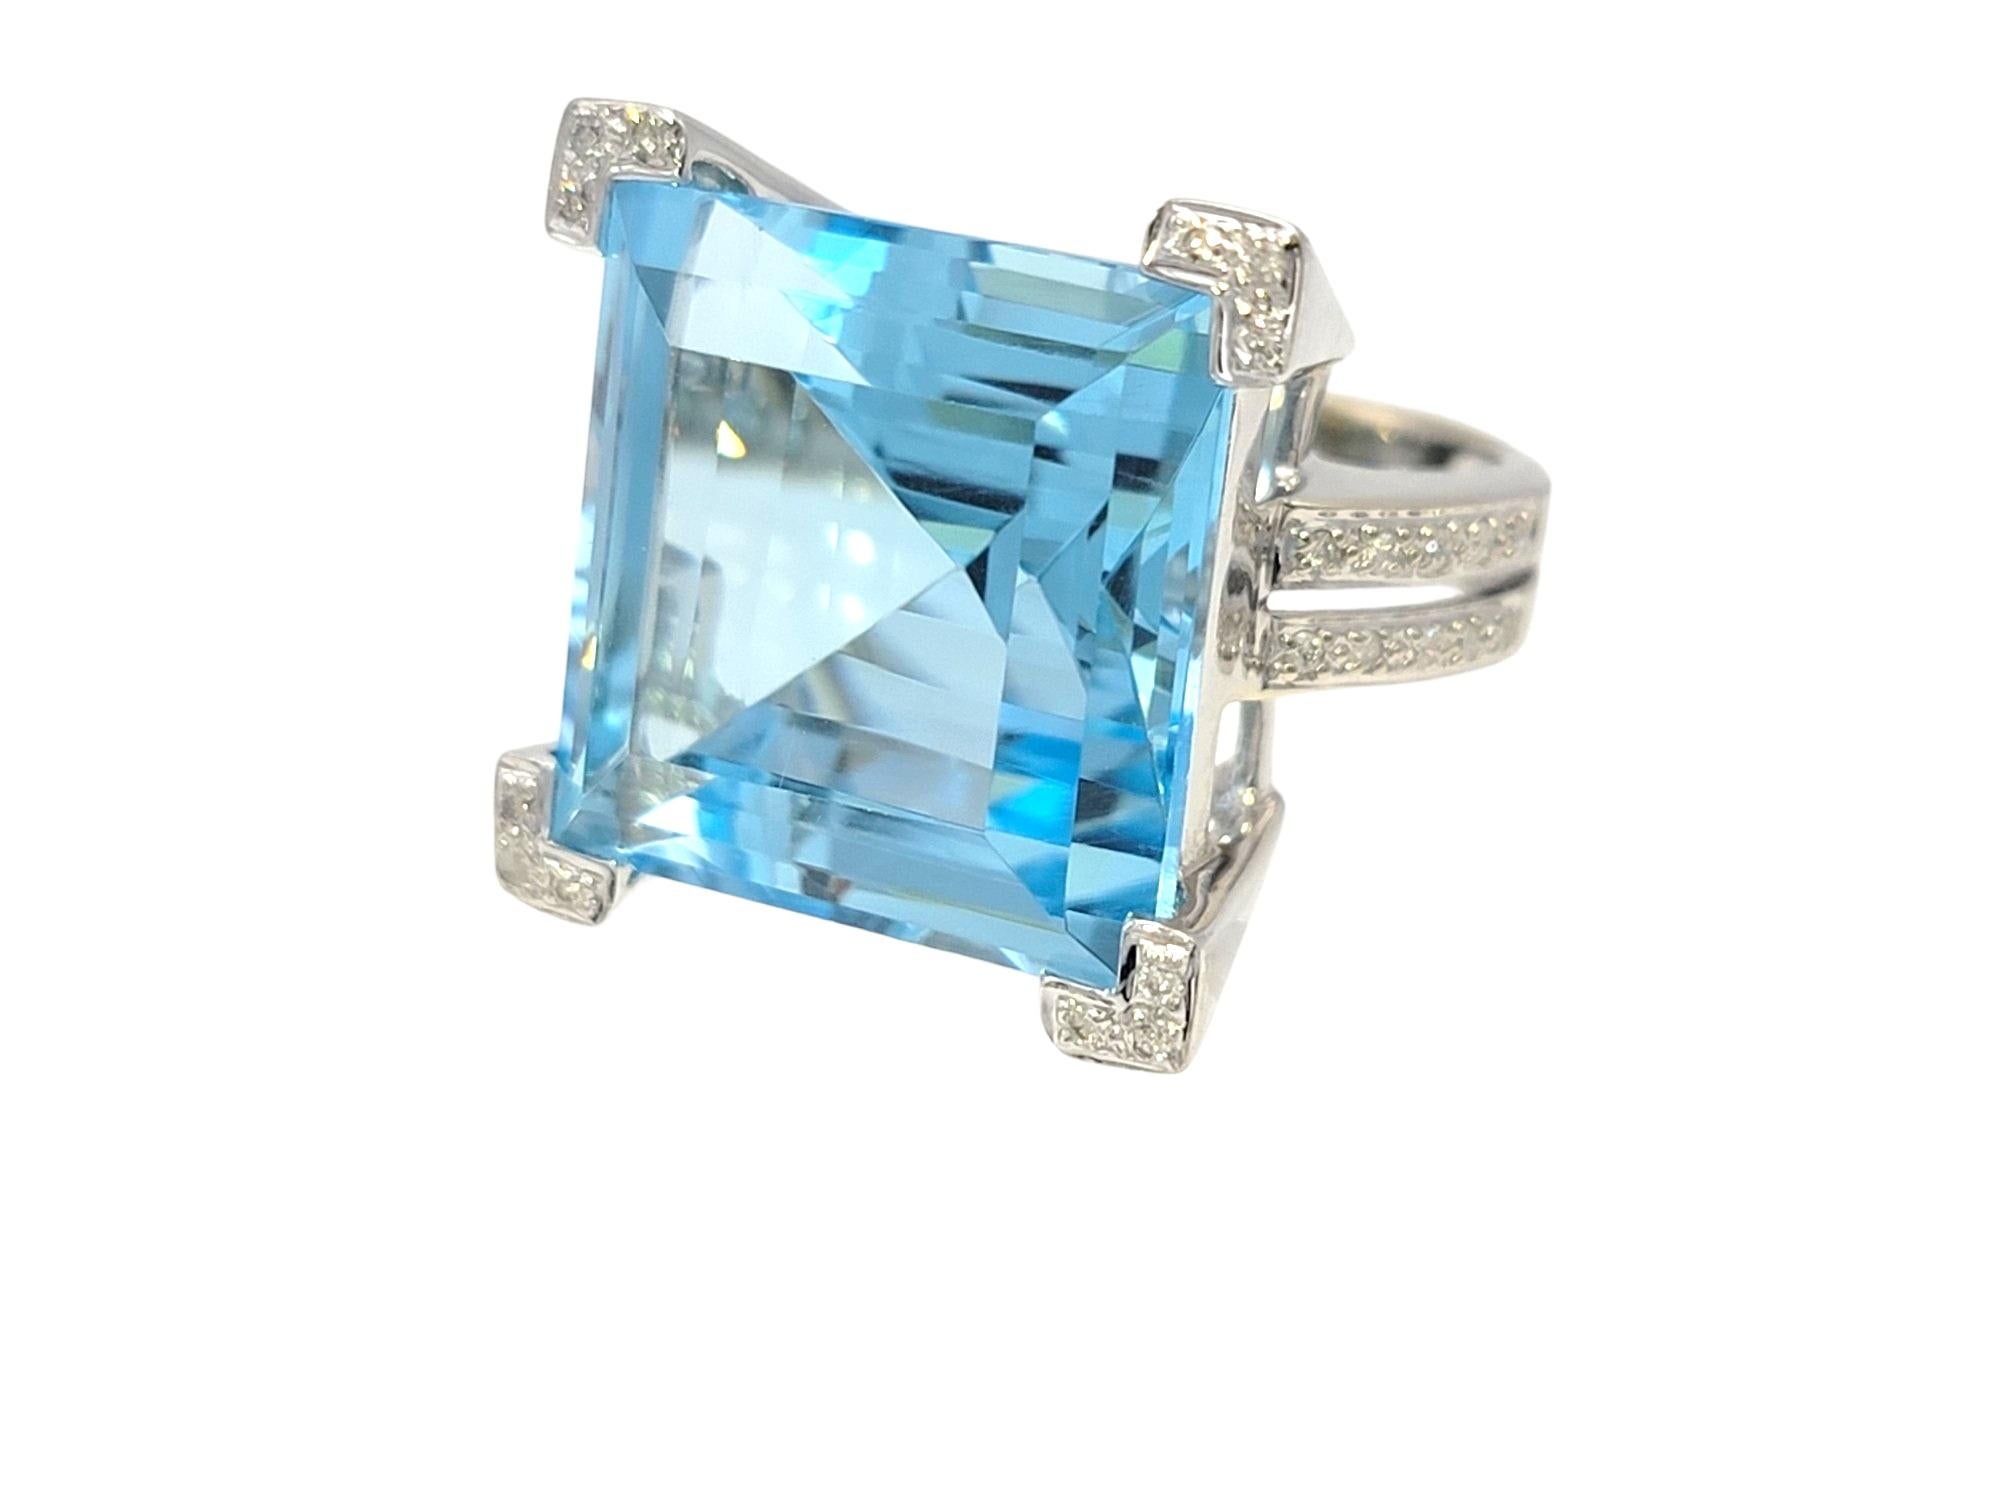 Contemporary Tous 34.62 Carat Square Blue Topaz Cocktail Ring with Diamonds in 18 Karat Gold  For Sale